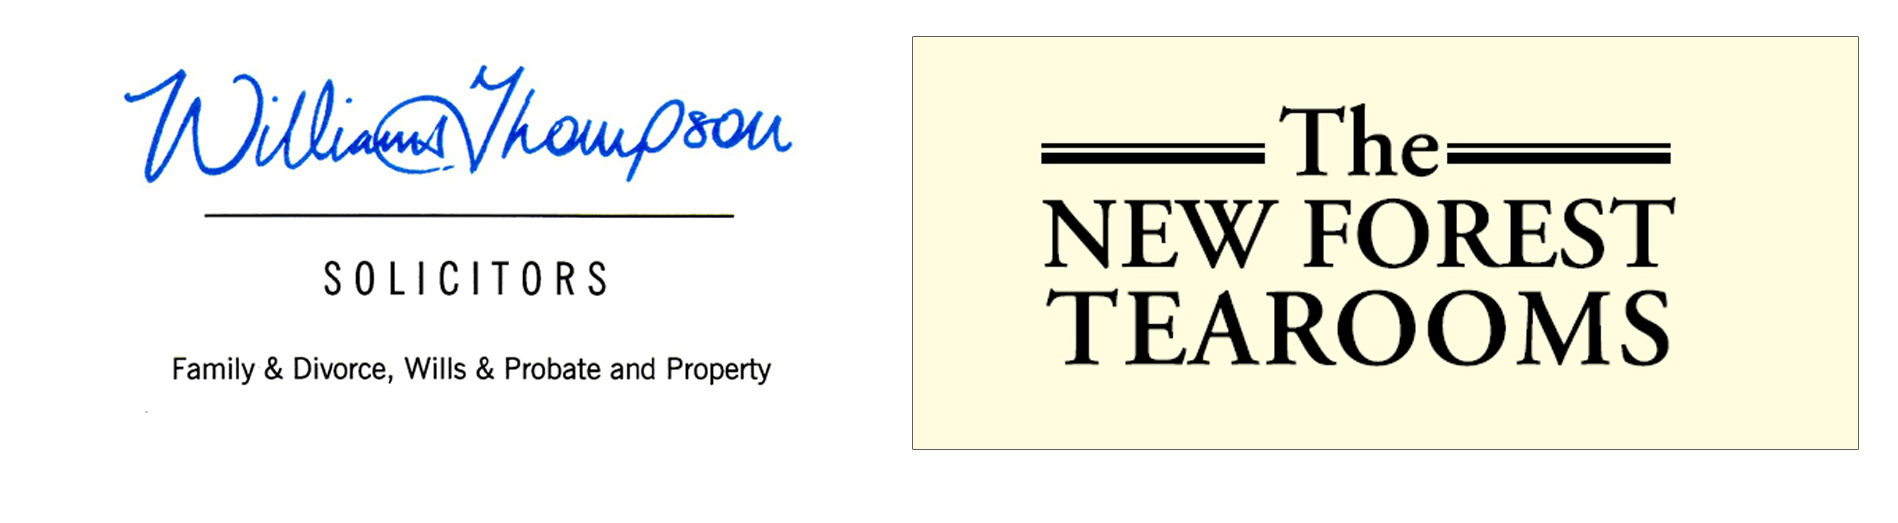 New Commissions – Williams Thompson Solicitors and The New Forest Tea Rooms